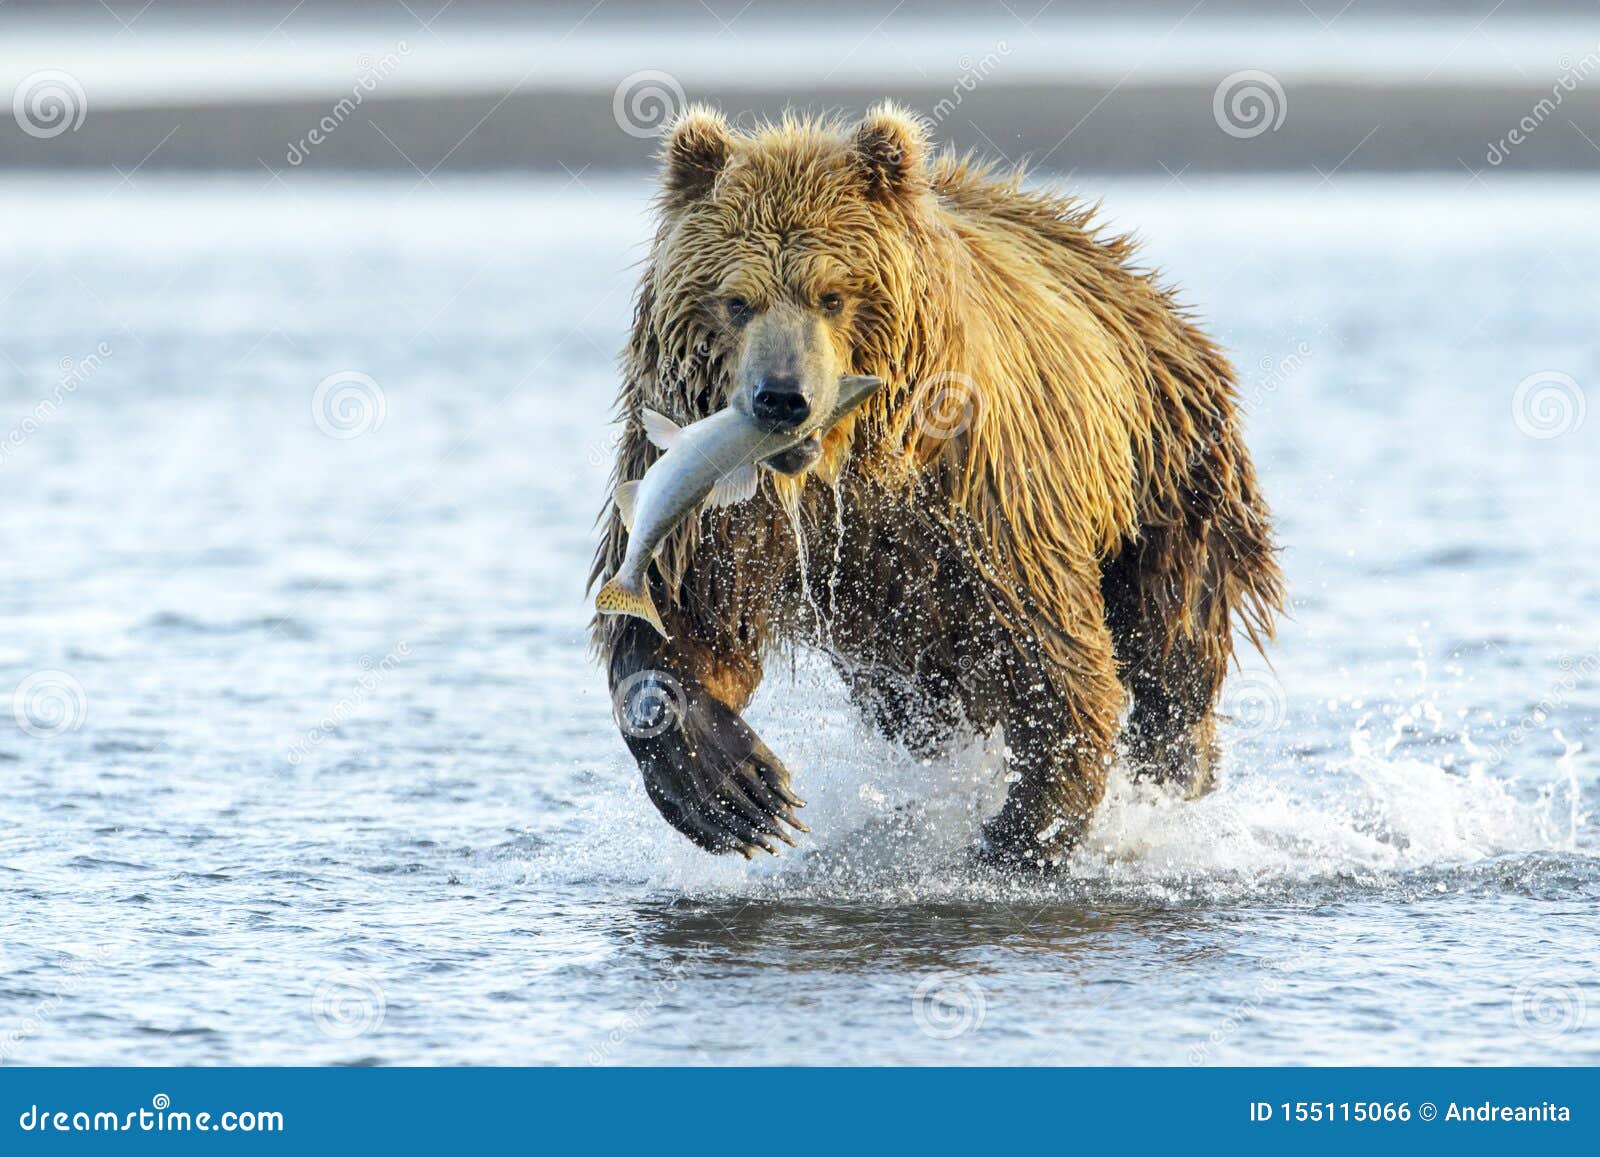 grizzly bear fishing for salmon